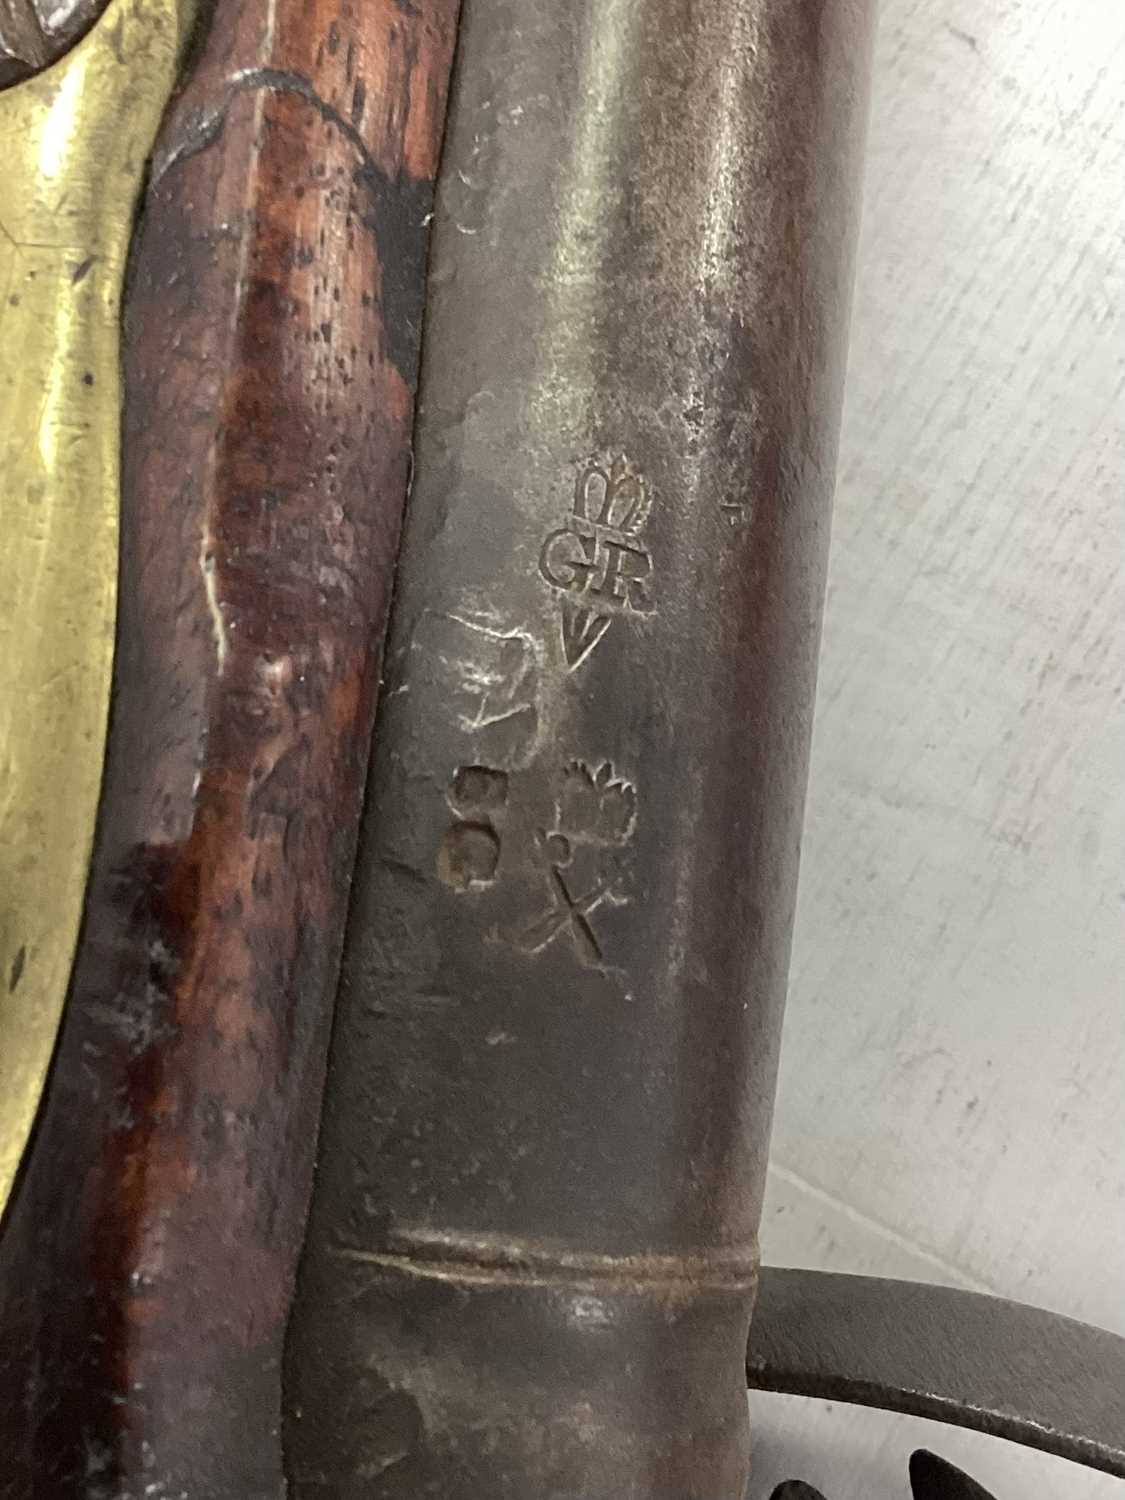 British India Pattern Circa 1810 'Brown Bess' Flintlock Musket, marked 'Tower' with 'GR' crown - Image 2 of 17